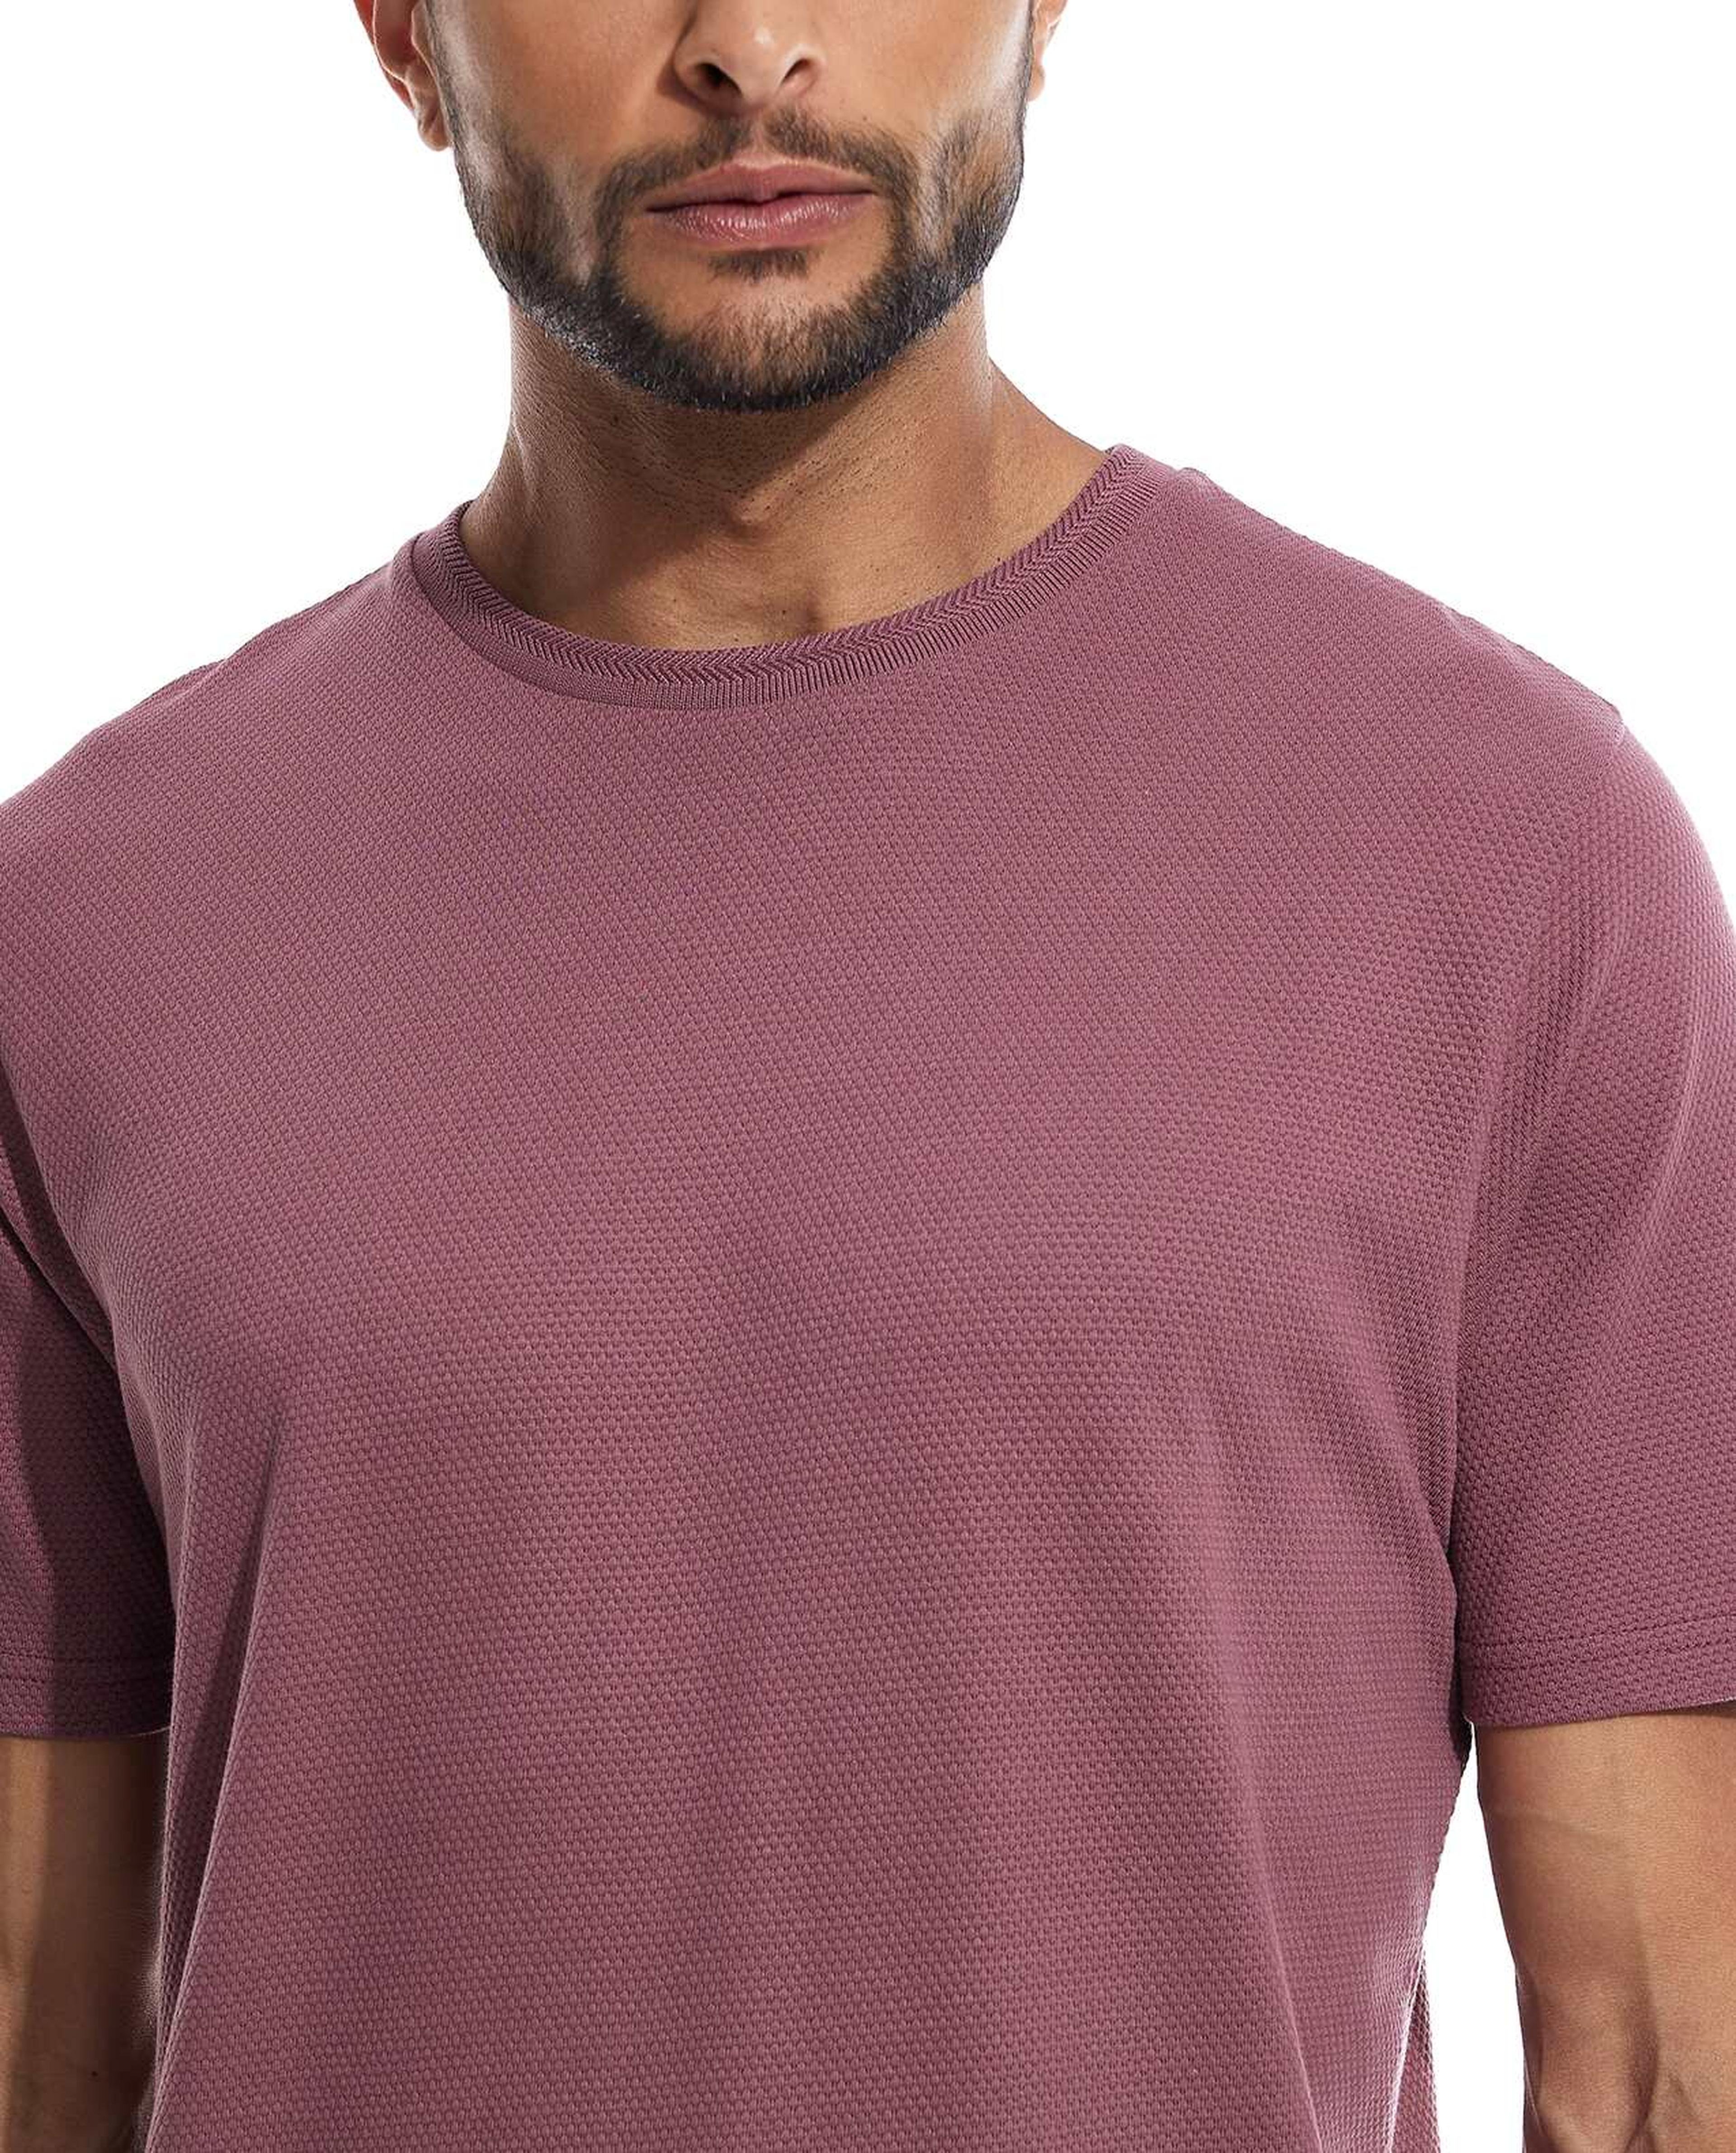 Textured T-Shirt with Crew Neck and Short Sleeves